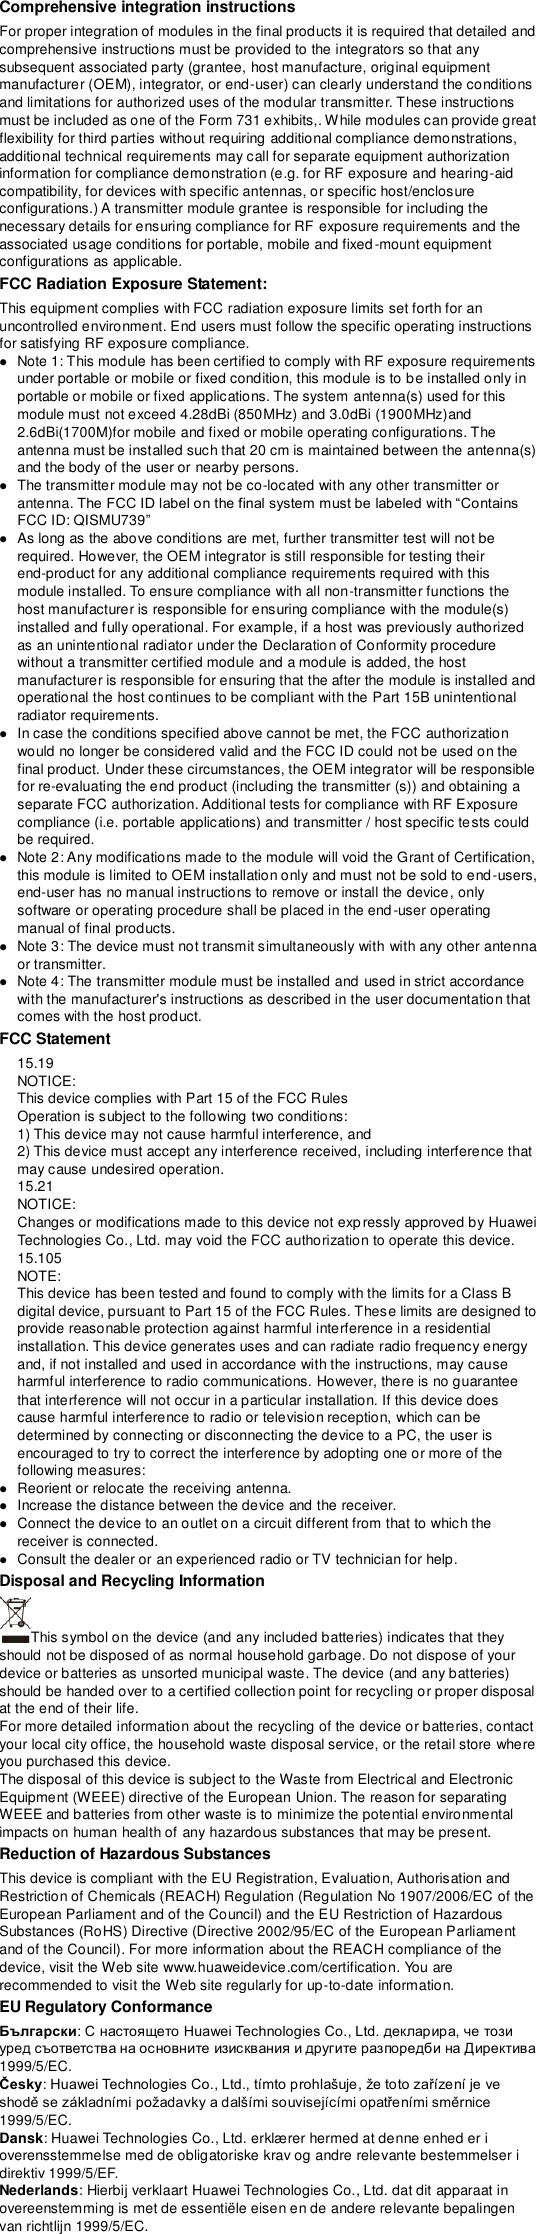 Comprehensive integration instructions   For proper integration of modules in the final products it is required that detailed and comprehensive instructions must be provided to the integrators so that any subsequent associated party (grantee, host manufacture, original equipment manufacturer (OEM), integrator, or end-user) can clearly understand the conditions and limitations for authorized uses of the modular transmitter. These instructions must be included as one of the Form 731 exhibits,. While modules can provide great flexibility for third parties without requiring additional compliance demonstrations, additional technical requirements may call for separate equipment authorization information for compliance demonstration (e.g. for RF exposure and hearing-aid compatibility, for devices with specific antennas, or specific host/enclosure configurations.) A transmitter module grantee is responsible for including the necessary details for ensuring compliance for RF exposure requirements and the associated usage conditions for portable, mobile and fixed-mount equipment configurations as applicable.   FCC Radiation Exposure Statement: This equipment complies with FCC radiation exposure limits set forth for an uncontrolled environment. End users must follow the specific operating instructions for satisfying RF exposure compliance.  Note 1: This module has been certified to comply with RF exposure requirements under portable or mobile or fixed condition, this module is to be installed only in portable or mobile or fixed applications. The system antenna(s) used for this module must not exceed 4.28dBi (850MHz) and 3.0dBi (1900MHz)and 2.6dBi(1700M)for mobile and fixed or mobile operating configurations. The antenna must be installed such that 20 cm is maintained between the antenna(s) and the body of the user or nearby persons.  The transmitter module may not be co-located with any other transmitter or antenna. FCC ID: QISMU739  As long as the above conditions are met, further transmitter test will not be required. However, the OEM integrator is still responsible for testing their end-product for any additional compliance requirements required with this module installed. To ensure compliance with all non-transmitter functions the host manufacturer is responsible for ensuring compliance with the module(s) installed and fully operational. For example, if a host was previously authorized as an unintentional radiator under the Declaration of Conformity procedure without a transmitter certified module and a module is added, the host manufacturer is responsible for ensuring that the after the module is installed and operational the host continues to be compliant with the Part 15B unintentional radiator requirements.  In case the conditions specified above cannot be met, the FCC authorization would no longer be considered valid and the FCC ID could not be used on the final product. Under these circumstances, the OEM integrator will be responsible for re-evaluating the end product (including the transmitter (s)) and obtaining a separate FCC authorization. Additional tests for compliance with RF Exposure compliance (i.e. portable applications) and transmitter / host specific tests could be required.  Note 2: Any modifications made to the module will void the Grant of Certification, this module is limited to OEM installation only and must not be sold to end-users, end-user has no manual instructions to remove or install the device, only software or operating procedure shall be placed in the end-user operating manual of final products.  Note 3: The device must not transmit simultaneously with with any other antenna or transmitter.  Note 4: The transmitter module must be installed and used in strict accordance with the manufacturer&apos;s instructions as described in the user documentation that comes with the host product. FCC Statement   15.19   NOTICE:   This device complies with Part 15 of the FCC Rules   Operation is subject to the following two conditions:   1) This device may not cause harmful interference, and   2) This device must accept any interference received, including interference that may cause undesired operation.   15.21   NOTICE:   Changes or modifications made to this device not expressly approved by Huawei Technologies Co., Ltd. may void the FCC authorization to operate this device.   15.105   NOTE:   This device has been tested and found to comply with the limits for a Class B digital device, pursuant to Part 15 of the FCC Rules. These limits are designed to provide reasonable protection against harmful interference in a residential installation. This device generates uses and can radiate radio frequency energy and, if not installed and used in accordance with the instructions, may cause harmful interference to radio communications. However, there is no guarantee that interference will not occur in a particular installation. If this device does cause harmful interference to radio or television reception, which can be determined by connecting or disconnecting the device to a PC, the user is encouraged to try to correct the interference by adopting one or more of the following measures:    Reorient or relocate the receiving antenna.    Increase the distance between the device and the receiver.    Connect the device to an outlet on a circuit different from that to which the receiver is connected.    Consult the dealer or an experienced radio or TV technician for help. Disposal and Recycling Information This symbol on the device (and any included batteries) indicates that they should not be disposed of as normal household garbage. Do not dispose of your device or batteries as unsorted municipal waste. The device (and any batteries) should be handed over to a certified collection point for recycling or proper disposal at the end of their life.     For more detailed information about the recycling of the device or batteries, contact your local city office, the household waste disposal service, or the retail store where you purchased this device. The disposal of this device is subject to the Waste from Electrical and Electronic Equipment (WEEE) directive of the European Union. The reason for separating WEEE and batteries from other waste is to minimize the potential environmental impacts on human health of any hazardous substances that may be present. Reduction of Hazardous Substances This device is compliant with the EU Registration, Evaluation, Authorisation and Restriction of Chemicals (REACH) Regulation (Regulation No 1907/2006/EC of the European Parliament and of the Council) and the EU Restriction of Hazardous Substances (RoHS) Directive (Directive 2002/95/EC of the European Parliament and of the Council). For more information about the REACH compliance of the device, visit the Web site www.huaweidevice.com/certification. You are recommended to visit the Web site regularly for up-to-date information. EU Regulatory Conformance Български1999/5/EC. Česky1999/5/EC. Dansk: Huawei Technologies Co., Ltd. erklæ rer hermed at denne enhed er i overensstemmelse med de obligatoriske krav og andre relevante bestemmelser i direktiv 1999/5/EF. Nederlands: Hierbij verklaart Huawei Technologies Co., Ltd. dat dit apparaat in overeenstemming is met de essentiële eisen en de andere relevante bepalingen van richtlijn 1999/5/EC. 